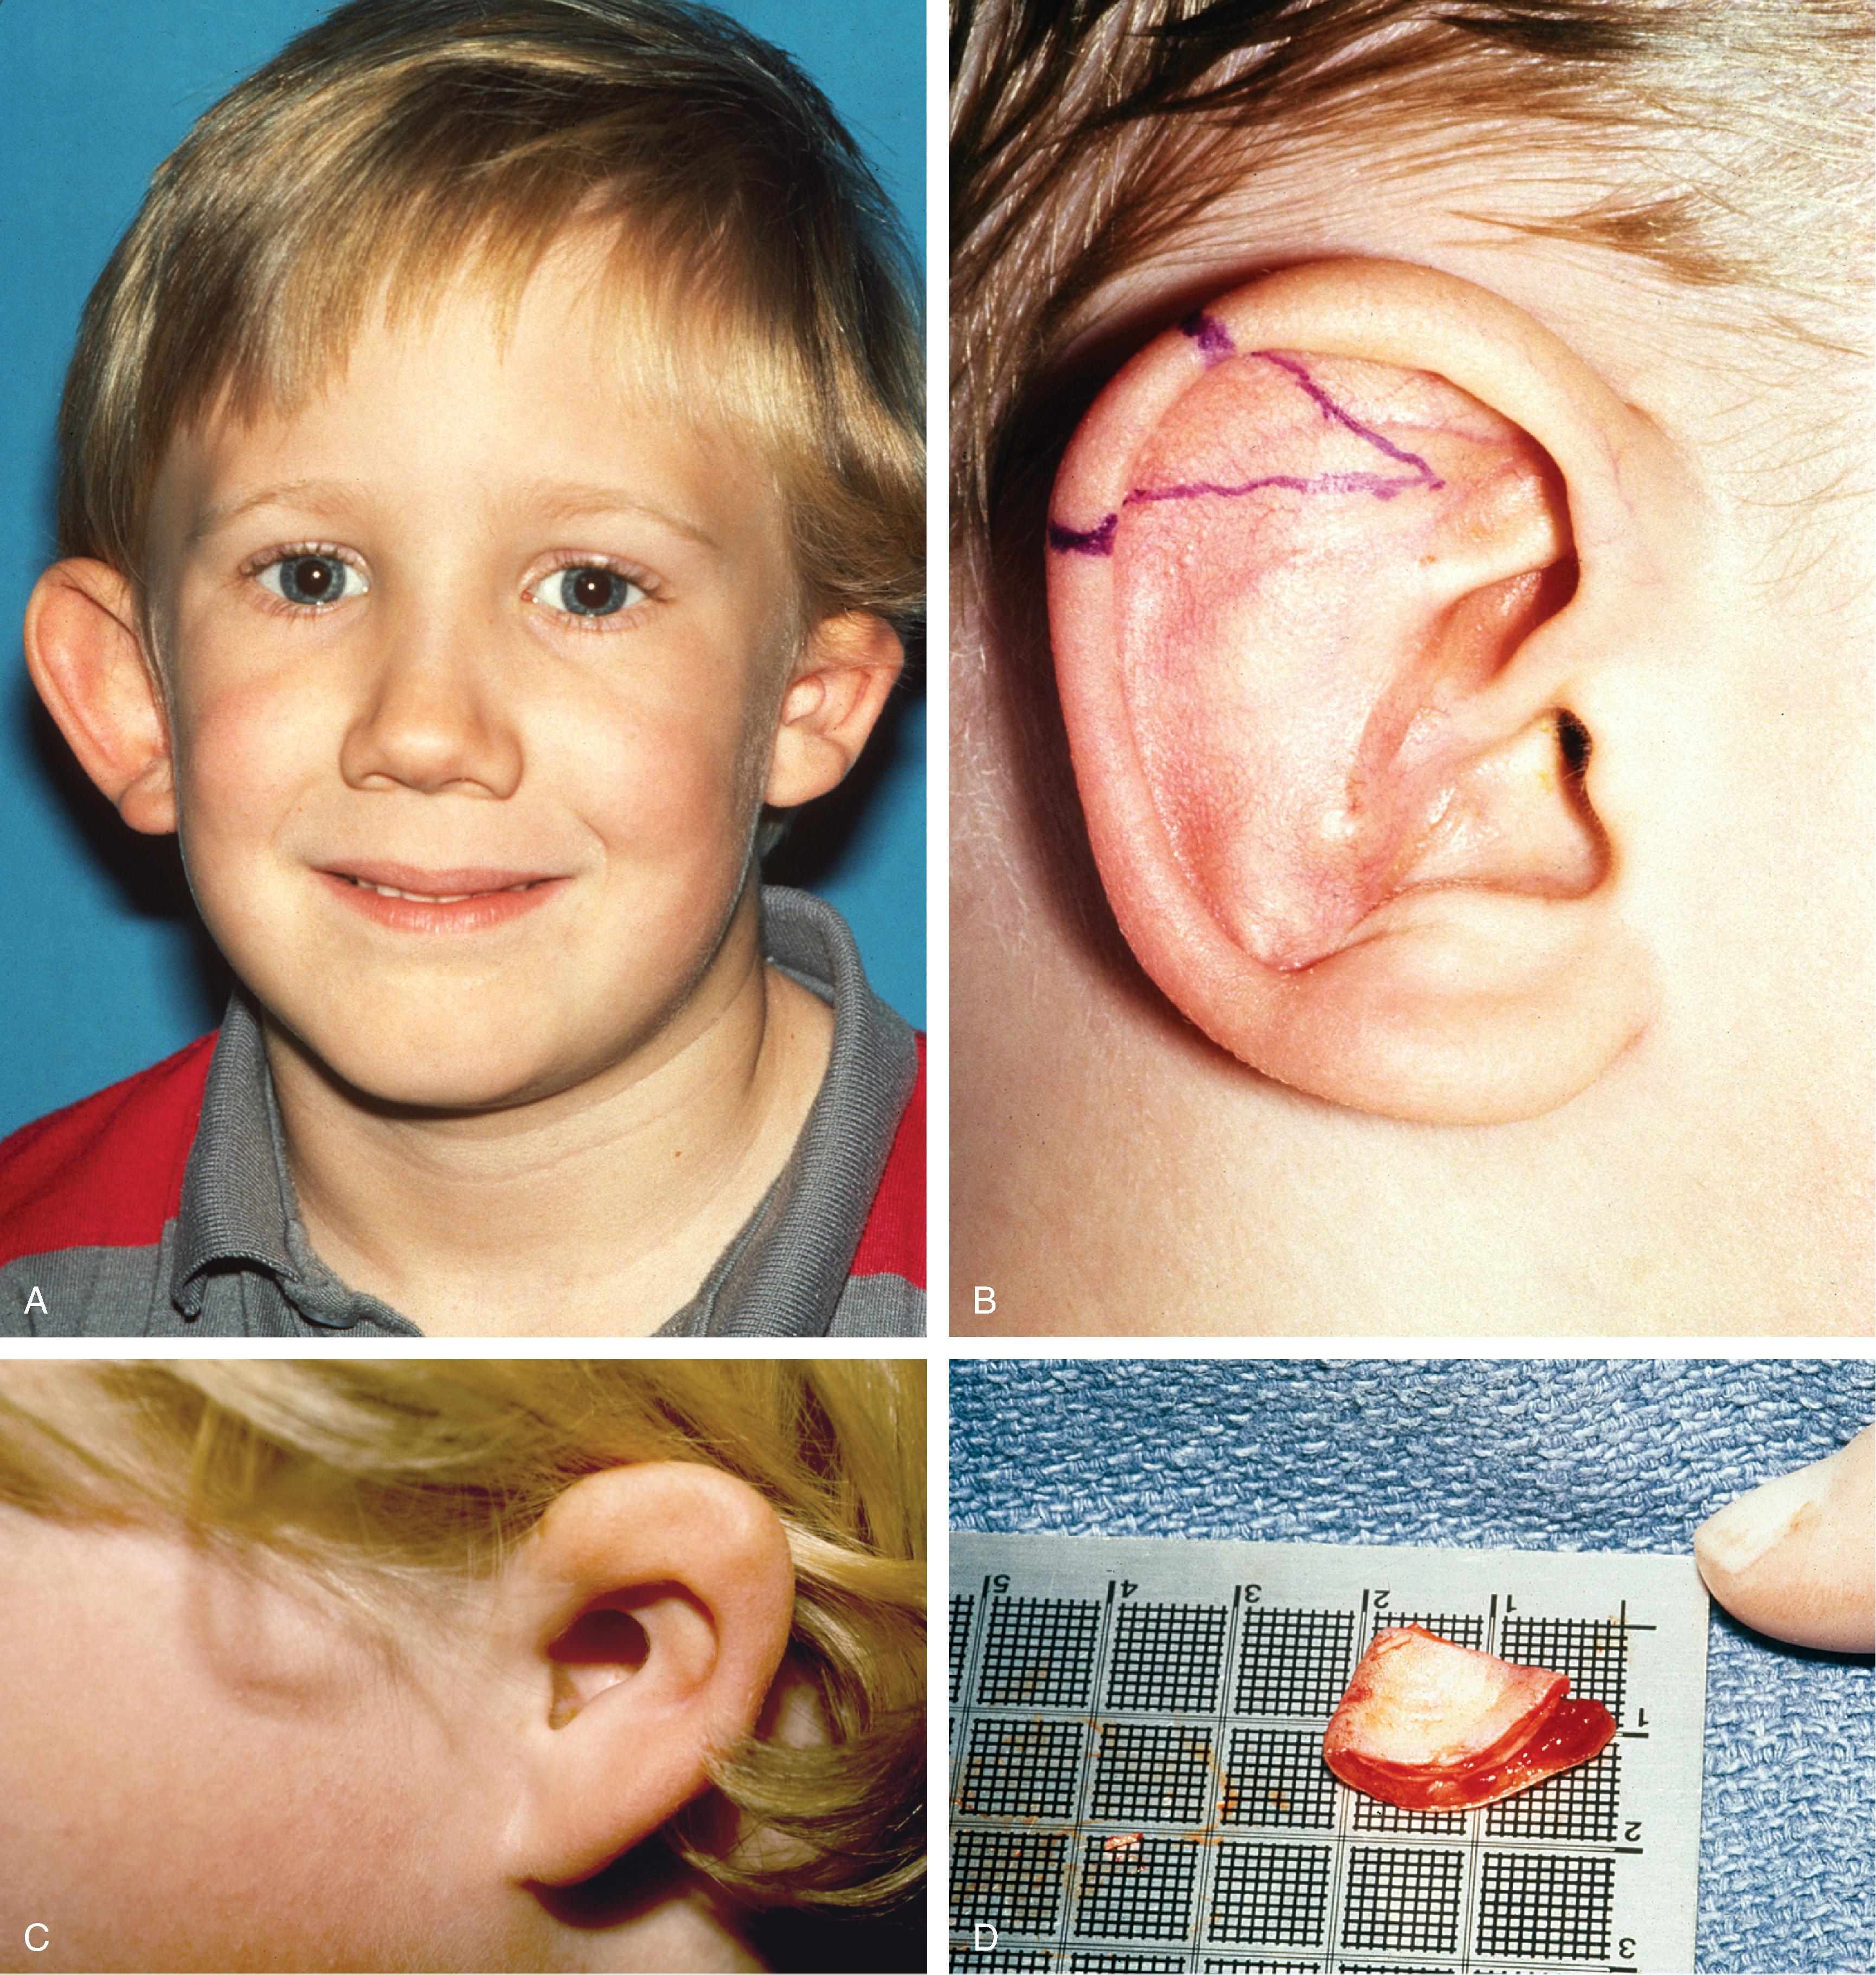 FIG. 22.5, Left congenital auricular deformity with greater than 20 mm difference in vertical height between auricles. A , Preoperative view. B , Donor ear composite graft outlined (one-half the size of recipient deficit height). C , Preoperative view of affected ear. D , Harvested composite graft. E , Graft in place. Vertical height increased by 1 cm. Epithelium removed from medial aspect of graft and medial aspect implanted in subcutaneous pocket. F , Postoperative result at 12 months.